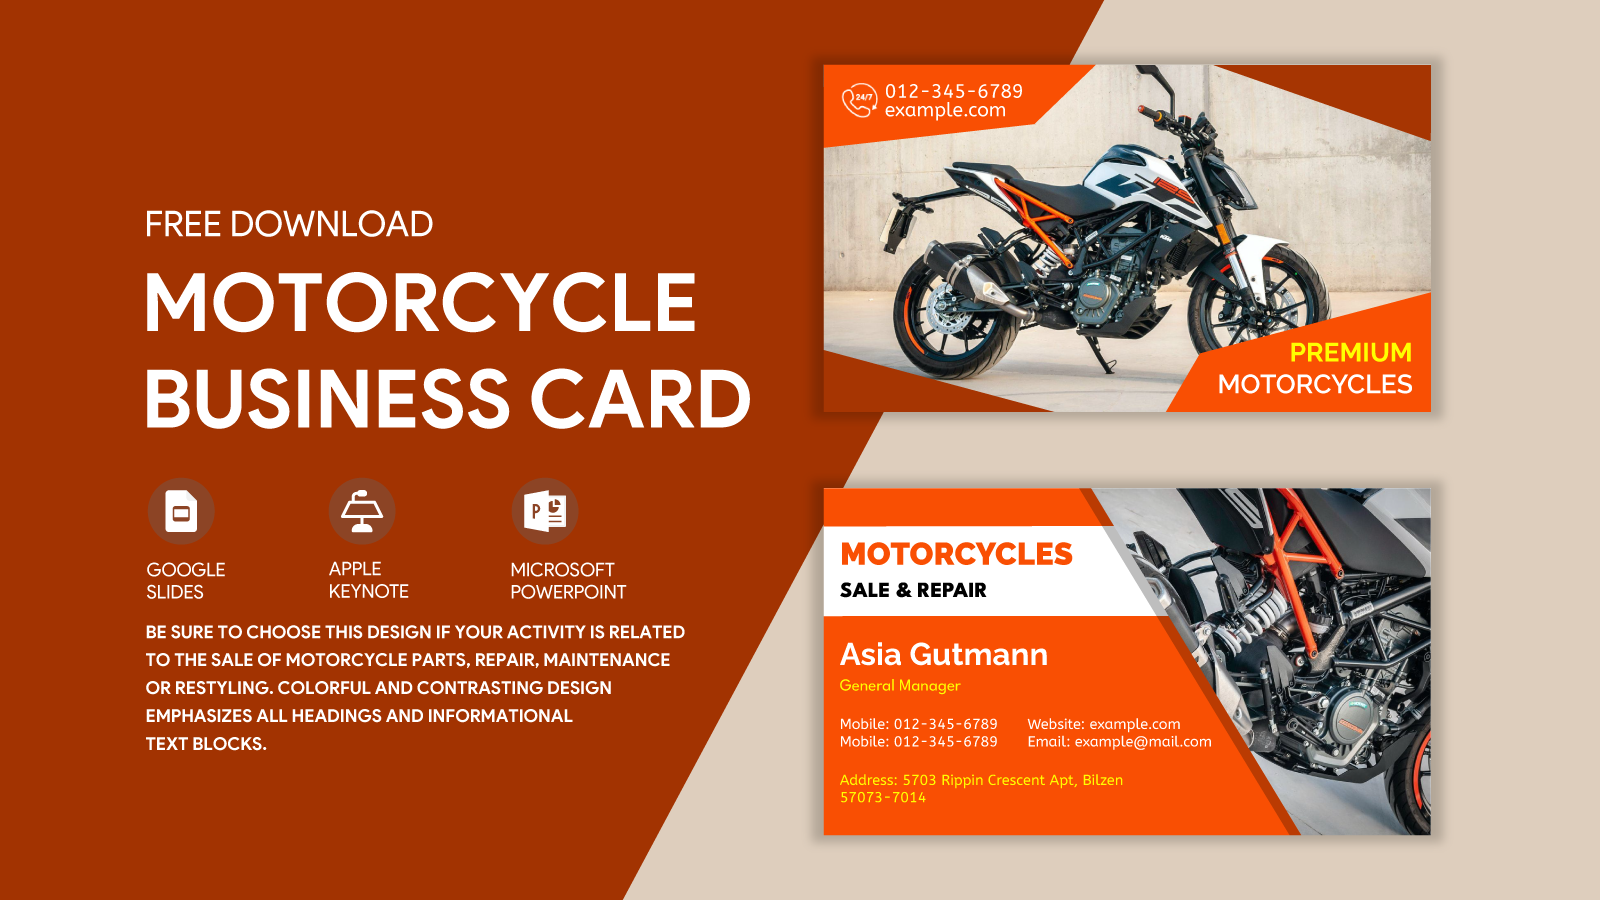 Motorcycle Business Card Free Google Docs Template gdoc.io